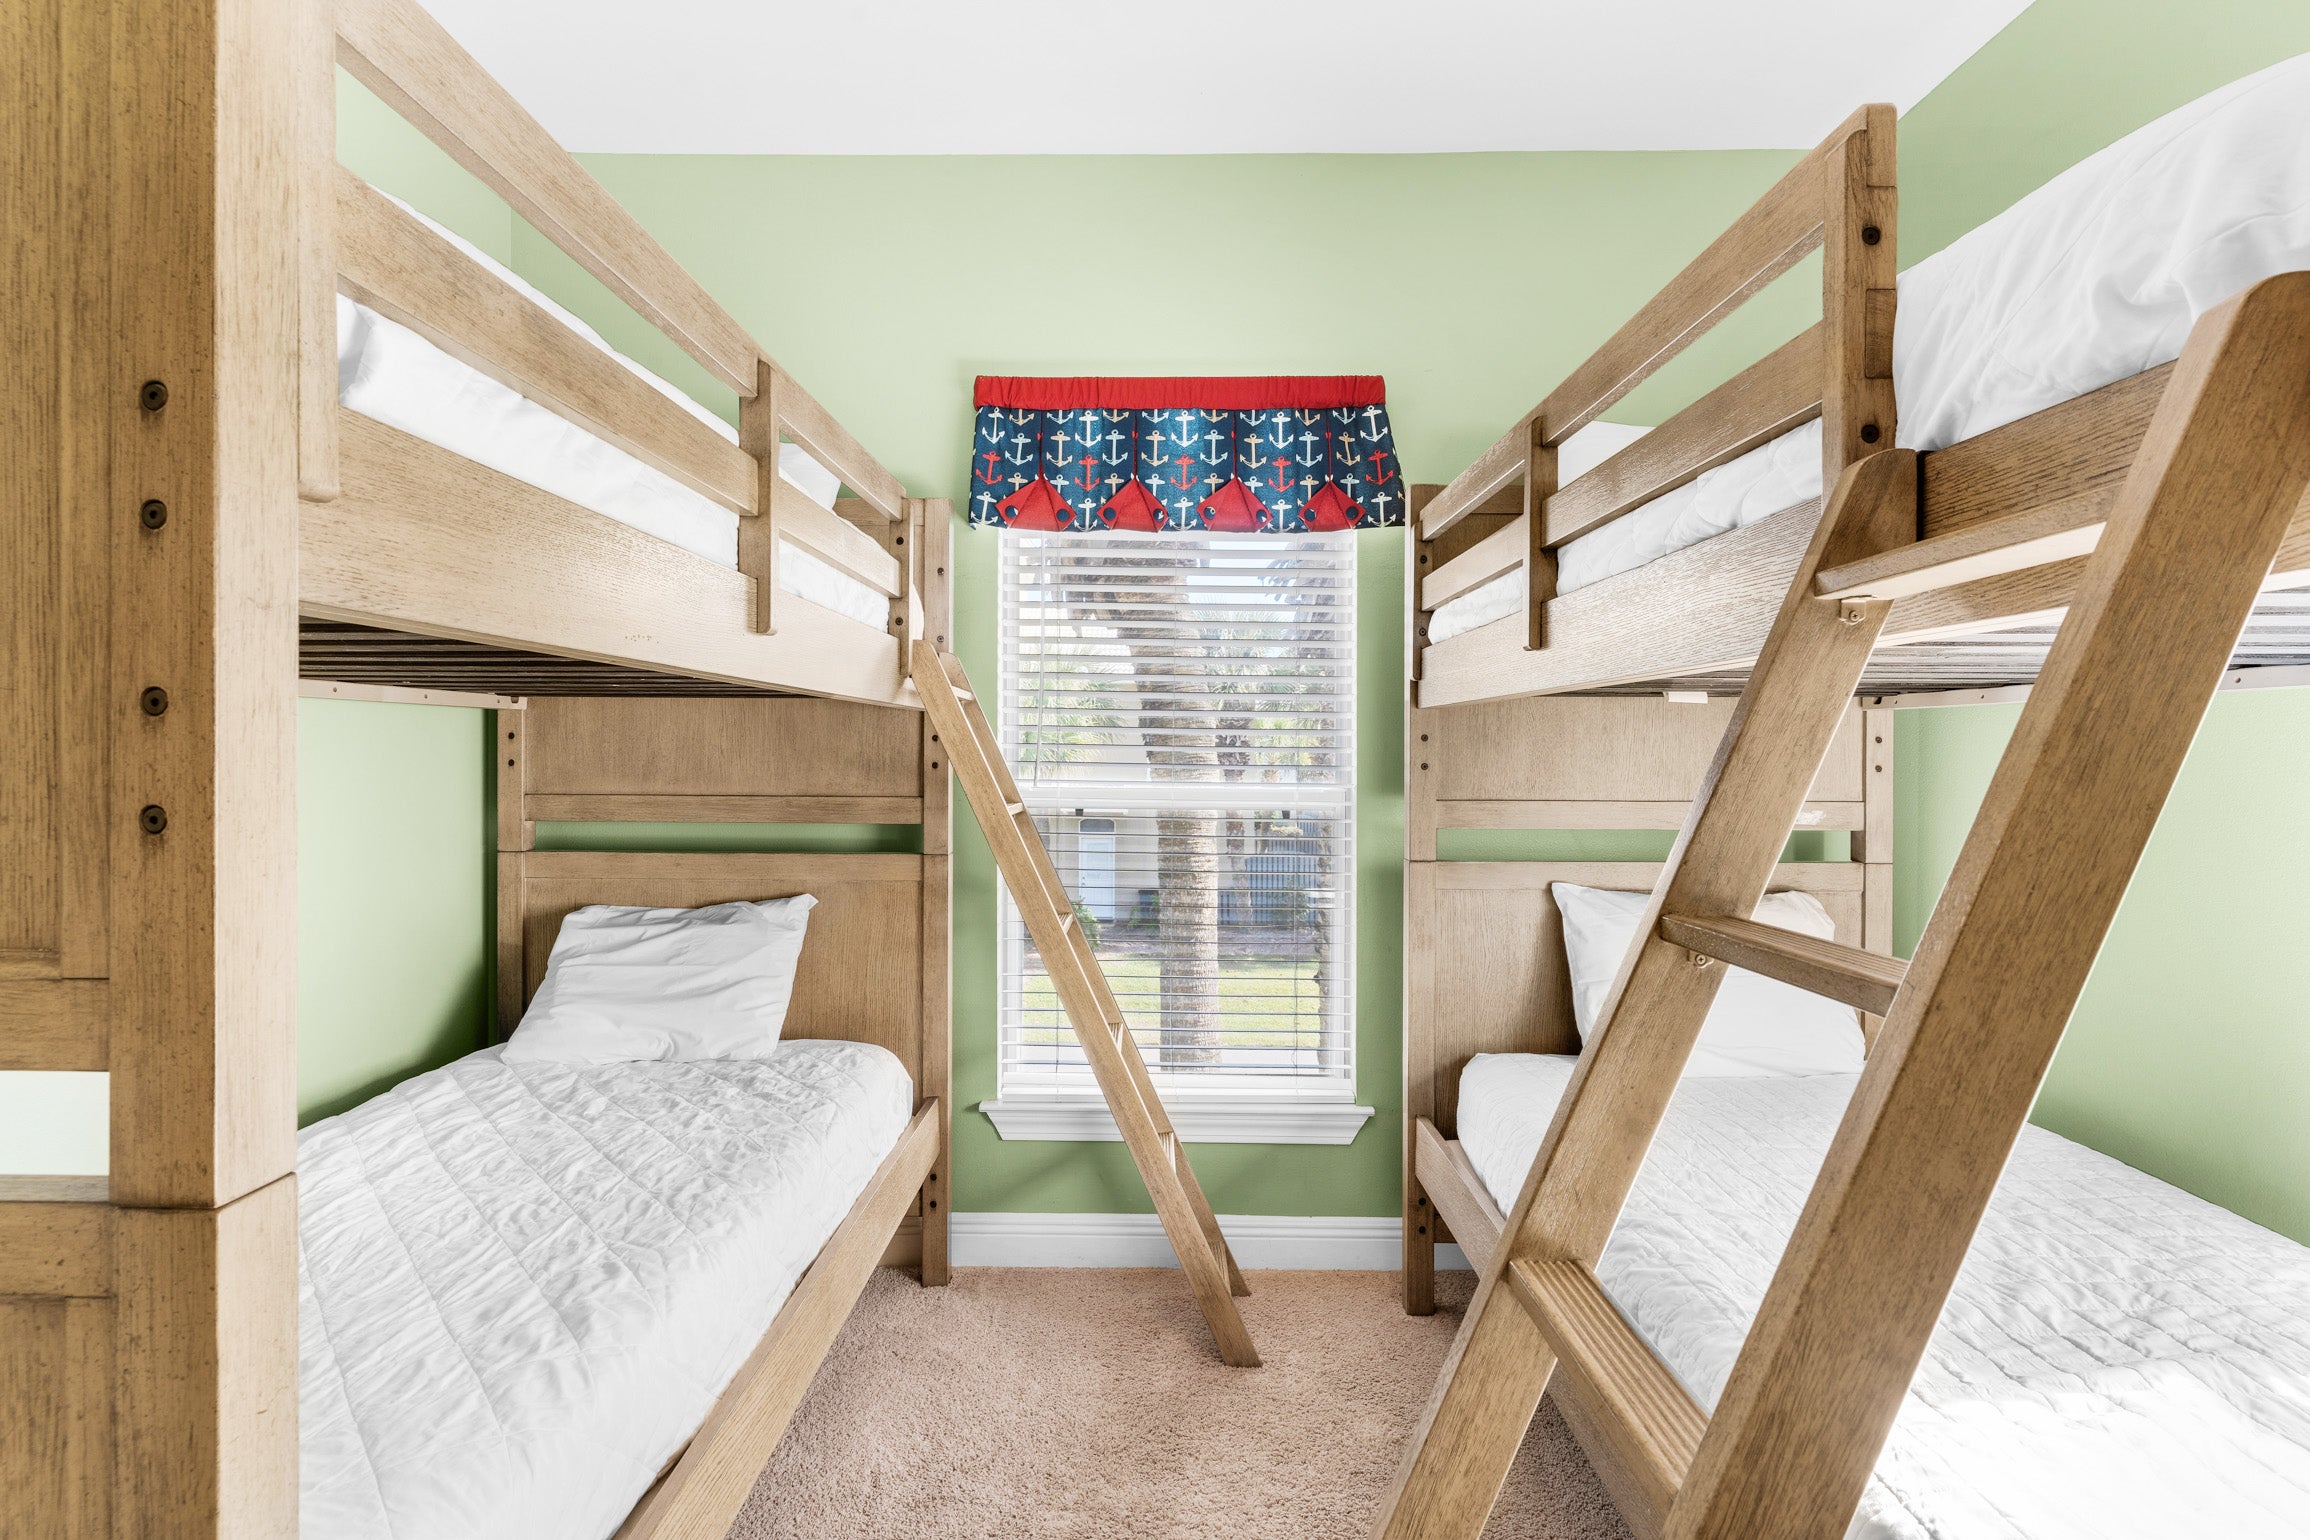 Bunk room with 2 bunks